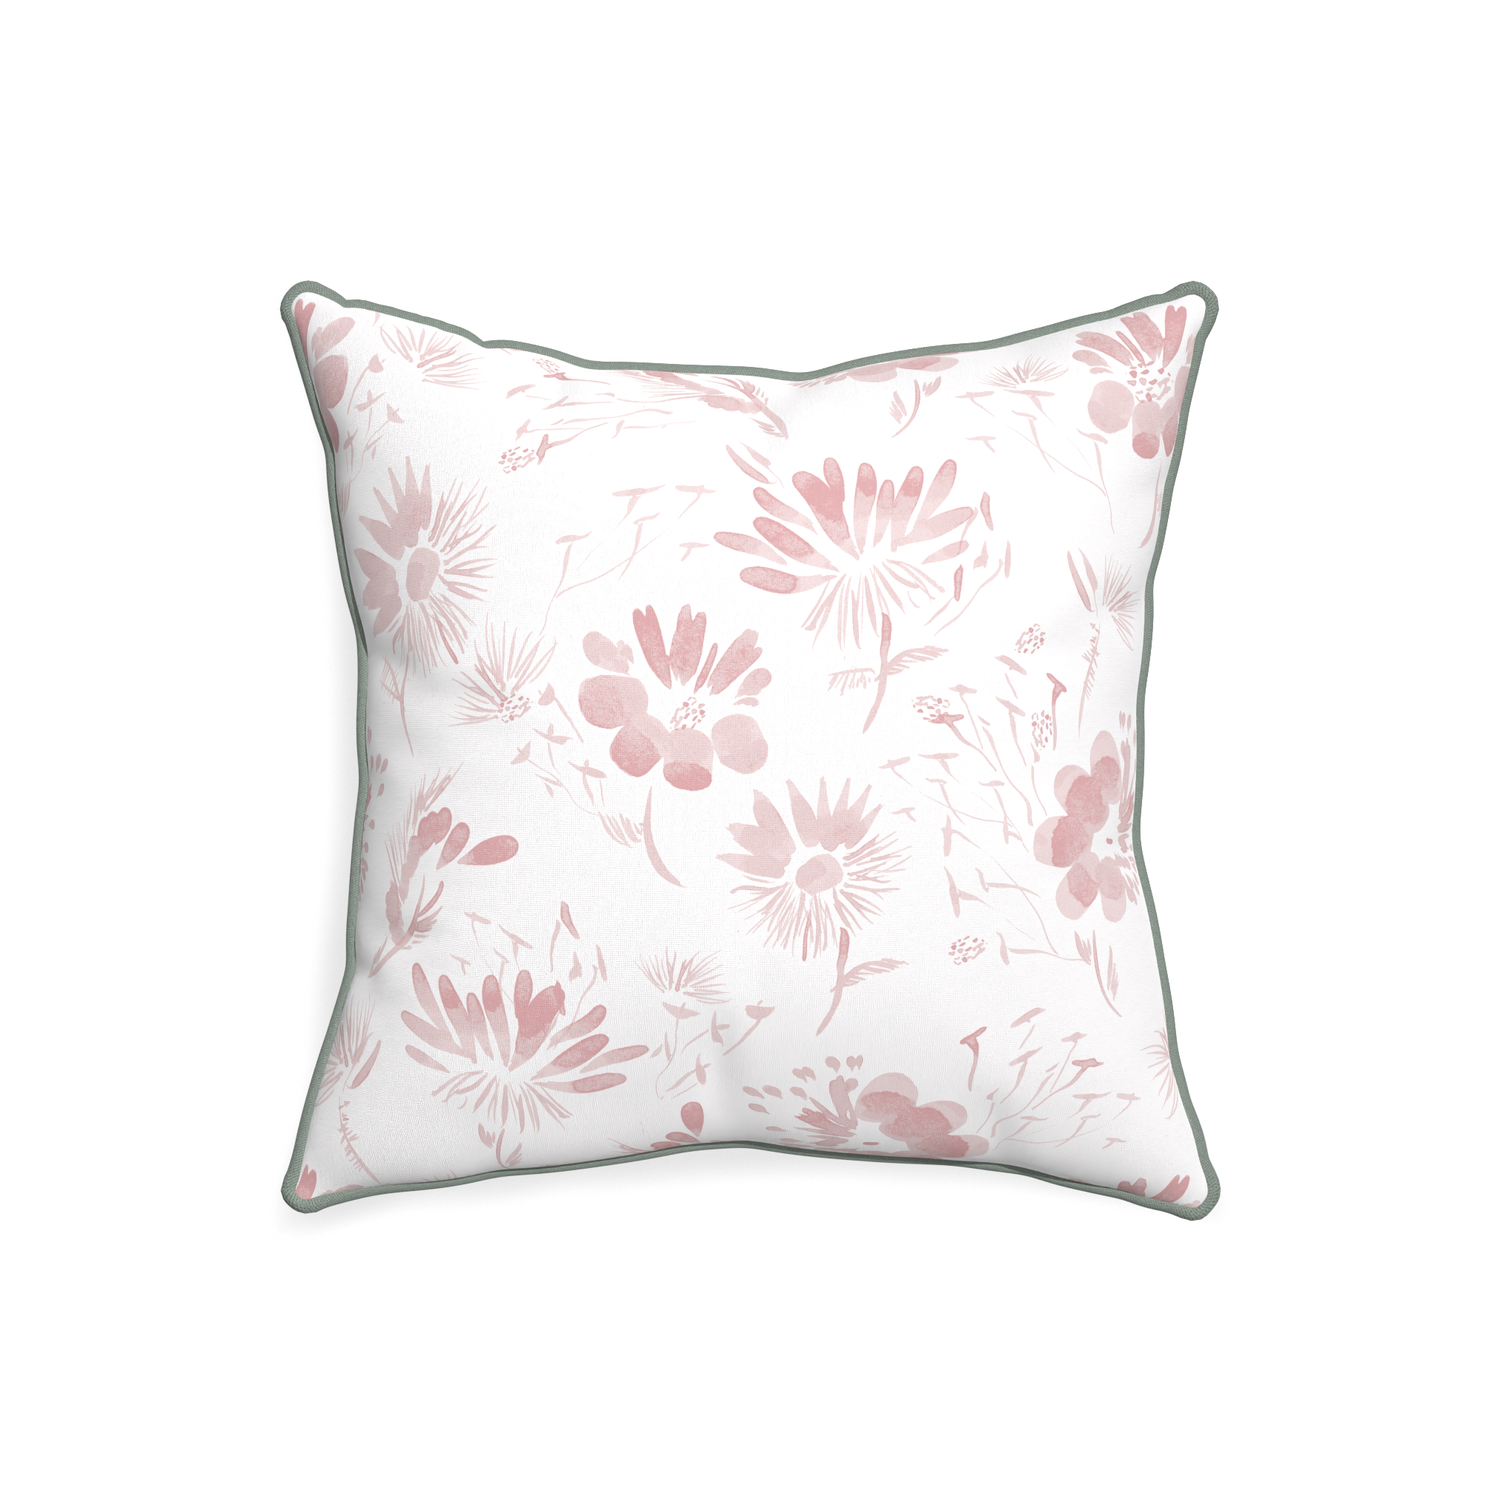 20-square blake custom pink floralpillow with sage piping on white background